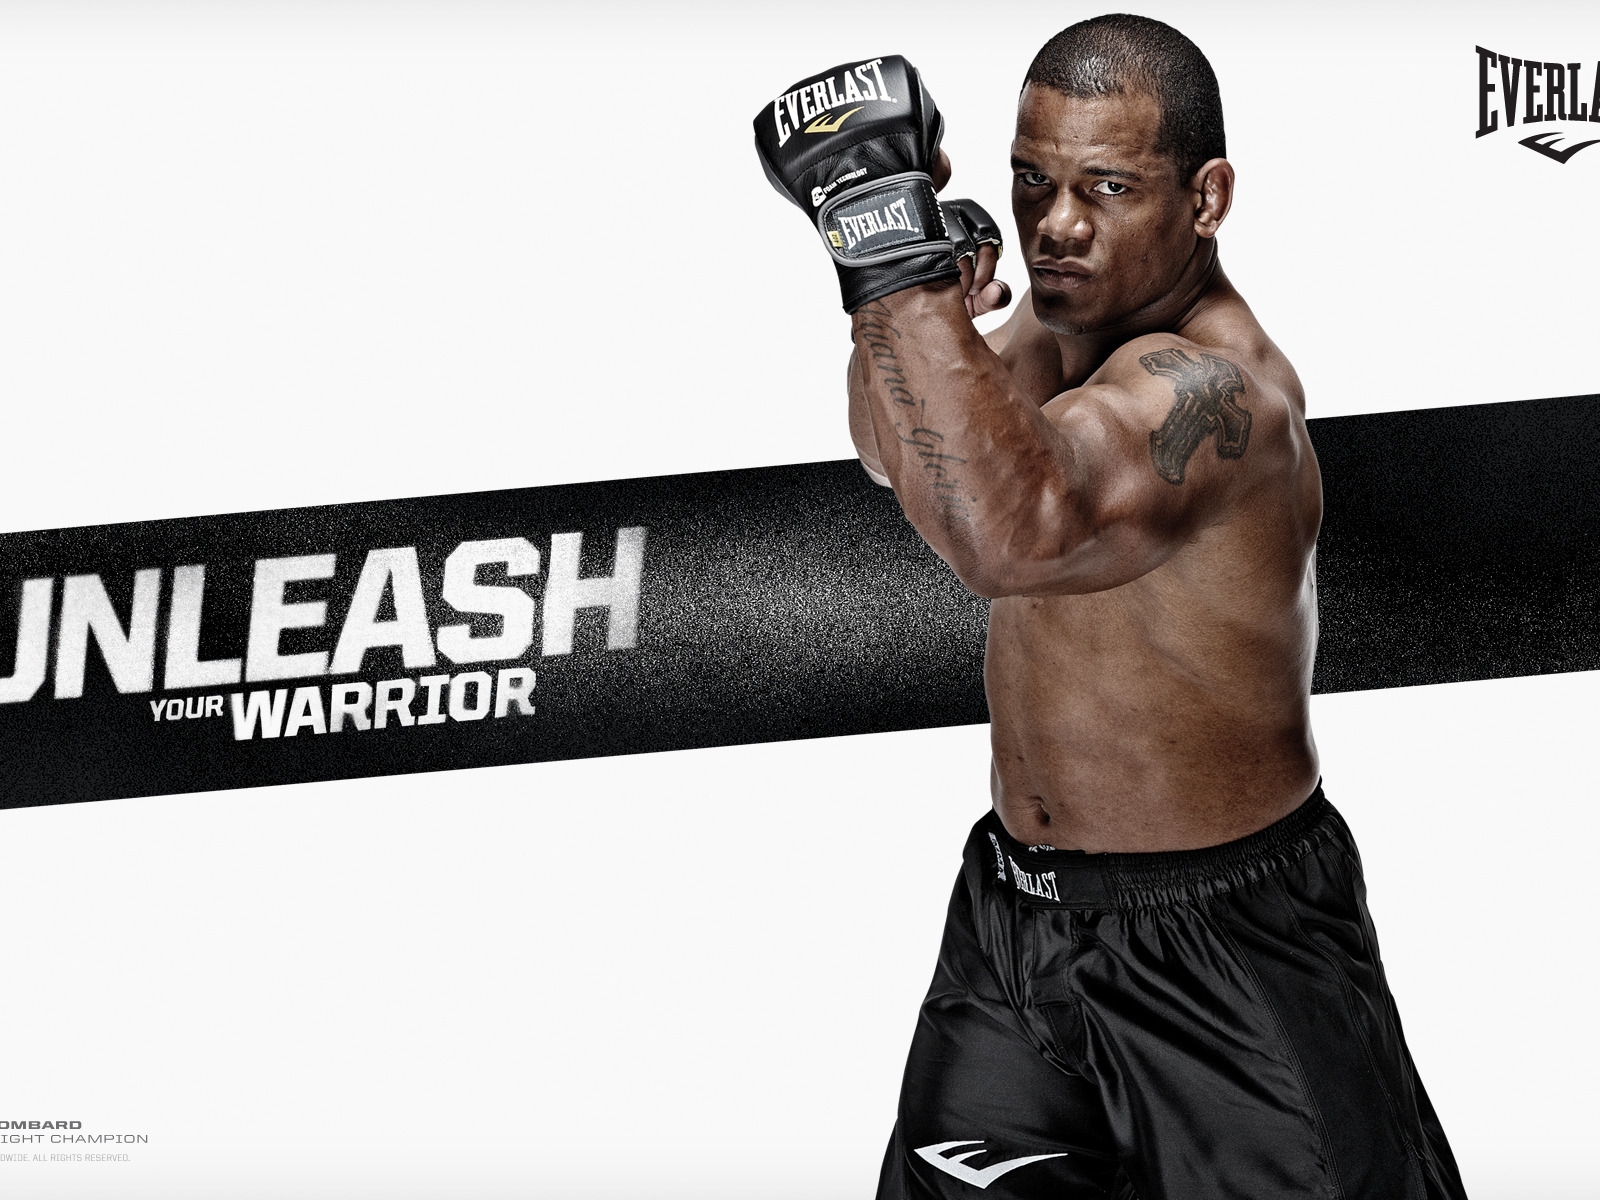 Hector Lombard for 1600 x 1200 resolution